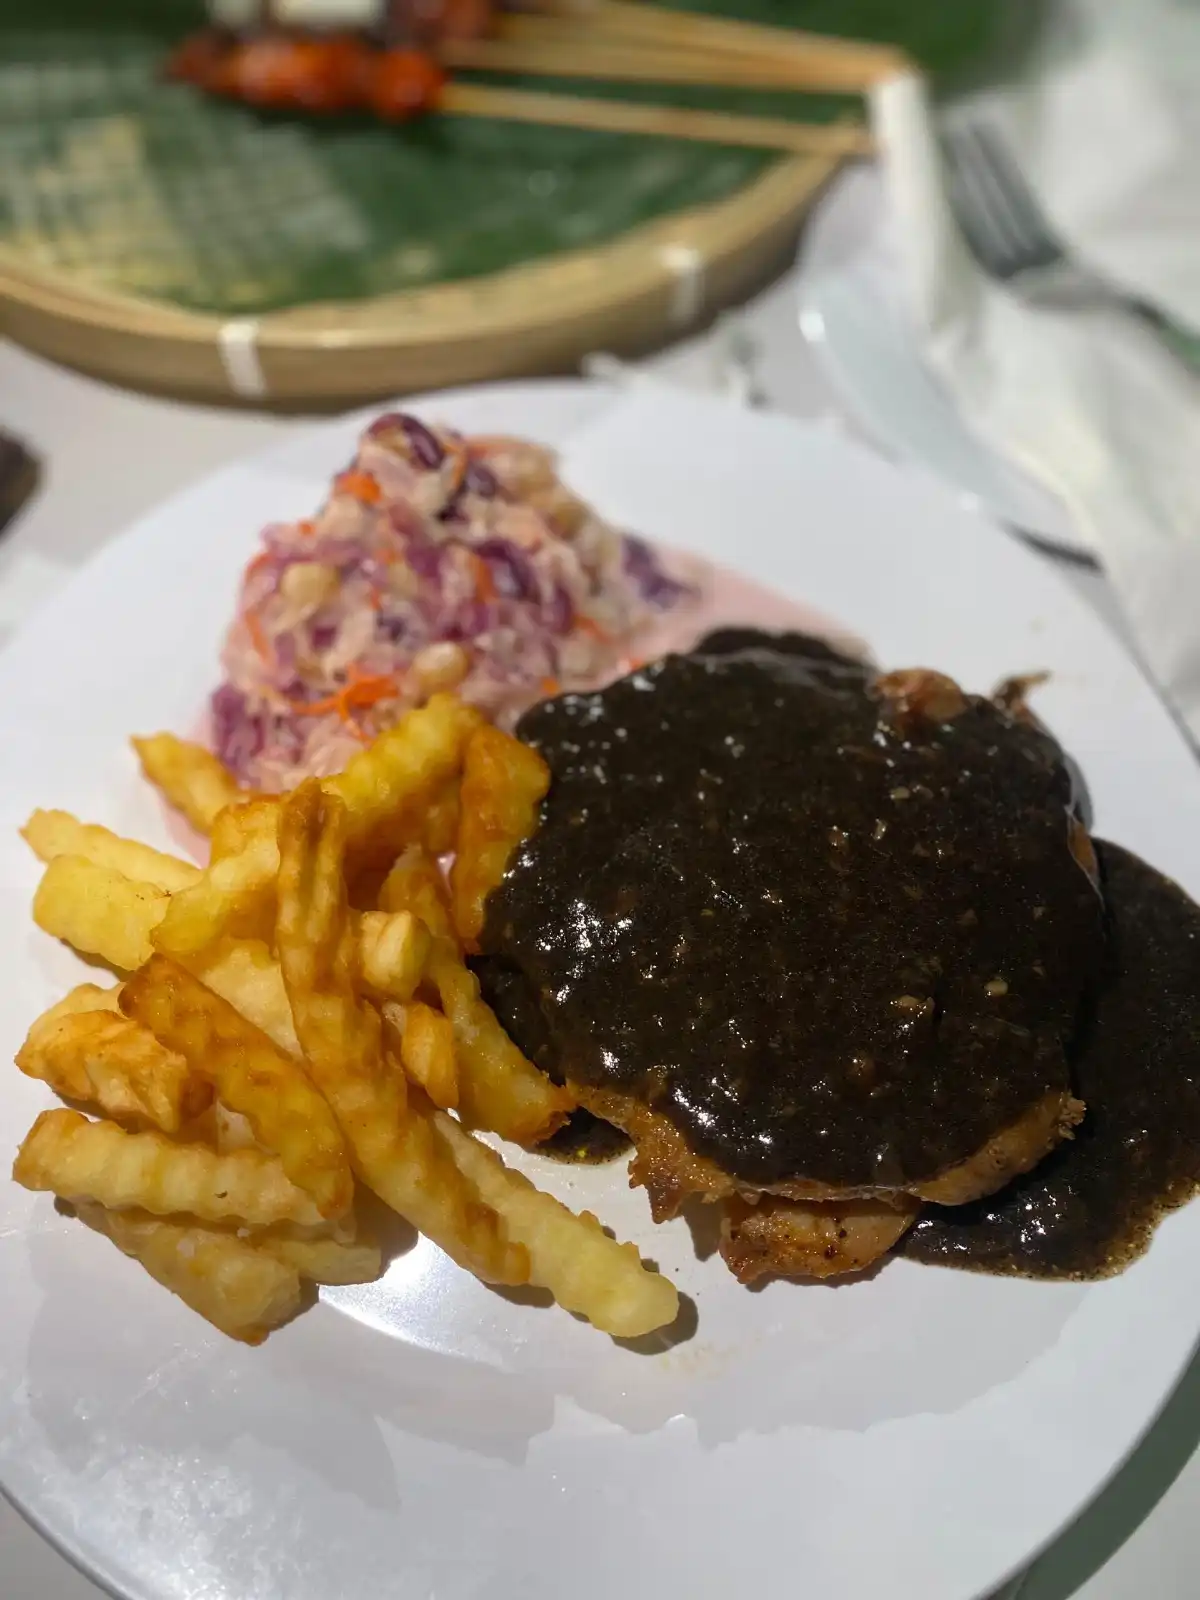 Plate of chicken chop with black pepper sauce, fries, and coleslaw on a white plate.